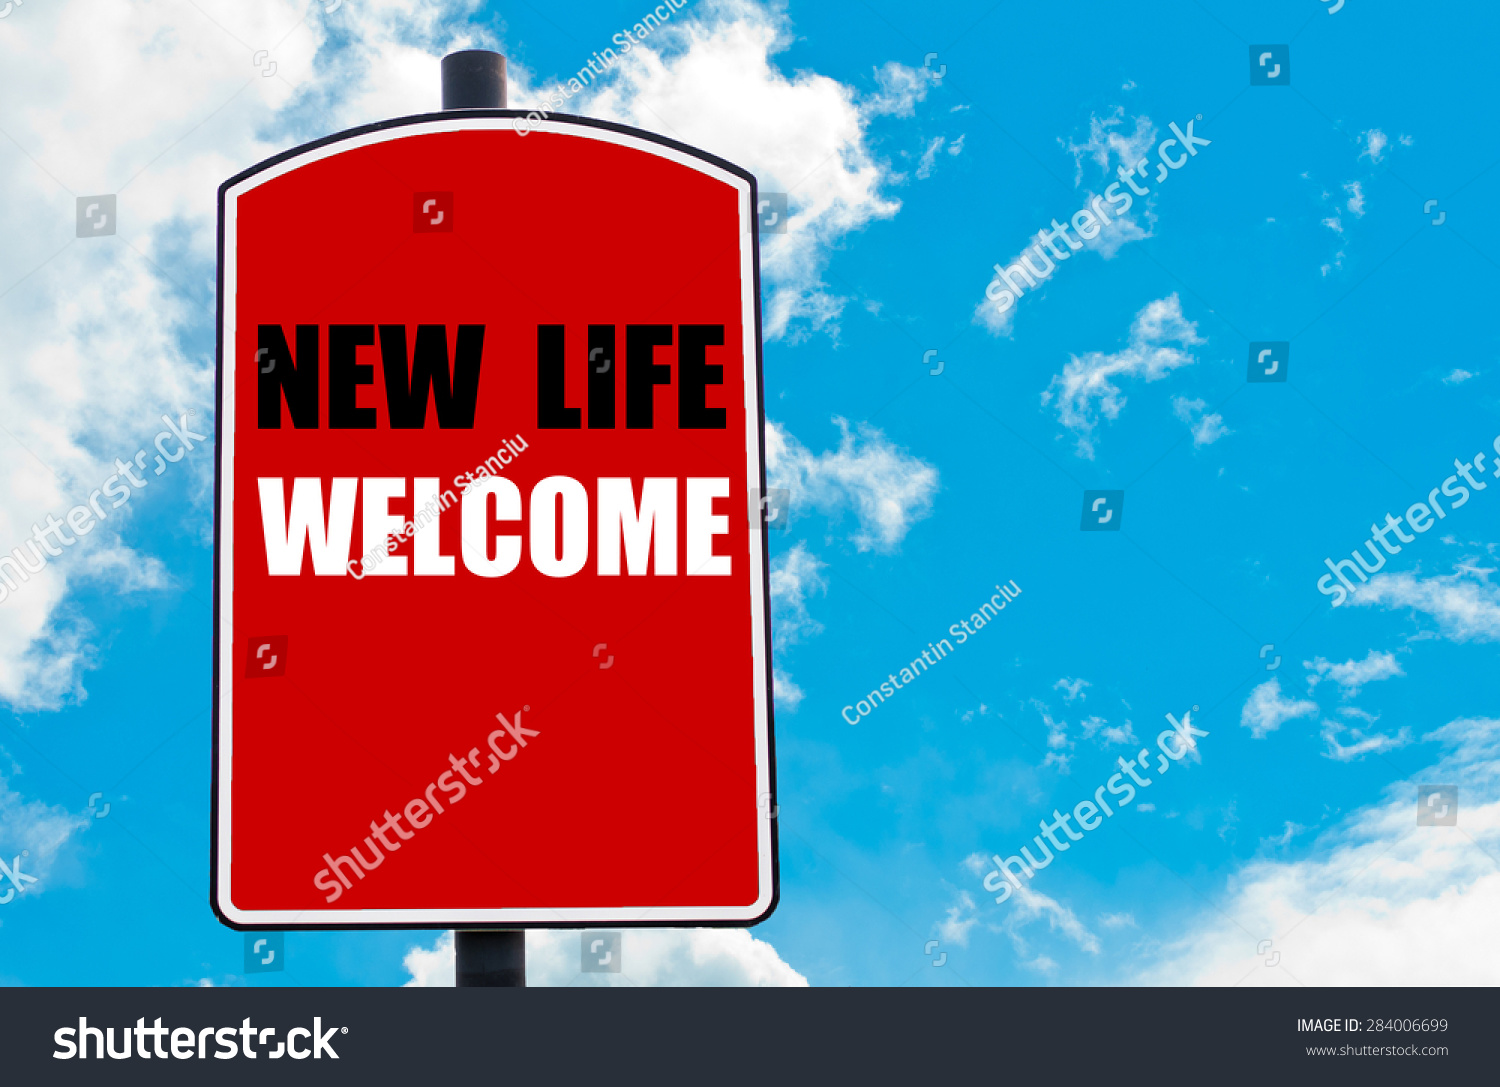 New Life Wel e motivational quote written on red road sign isolated over clear blue sky background